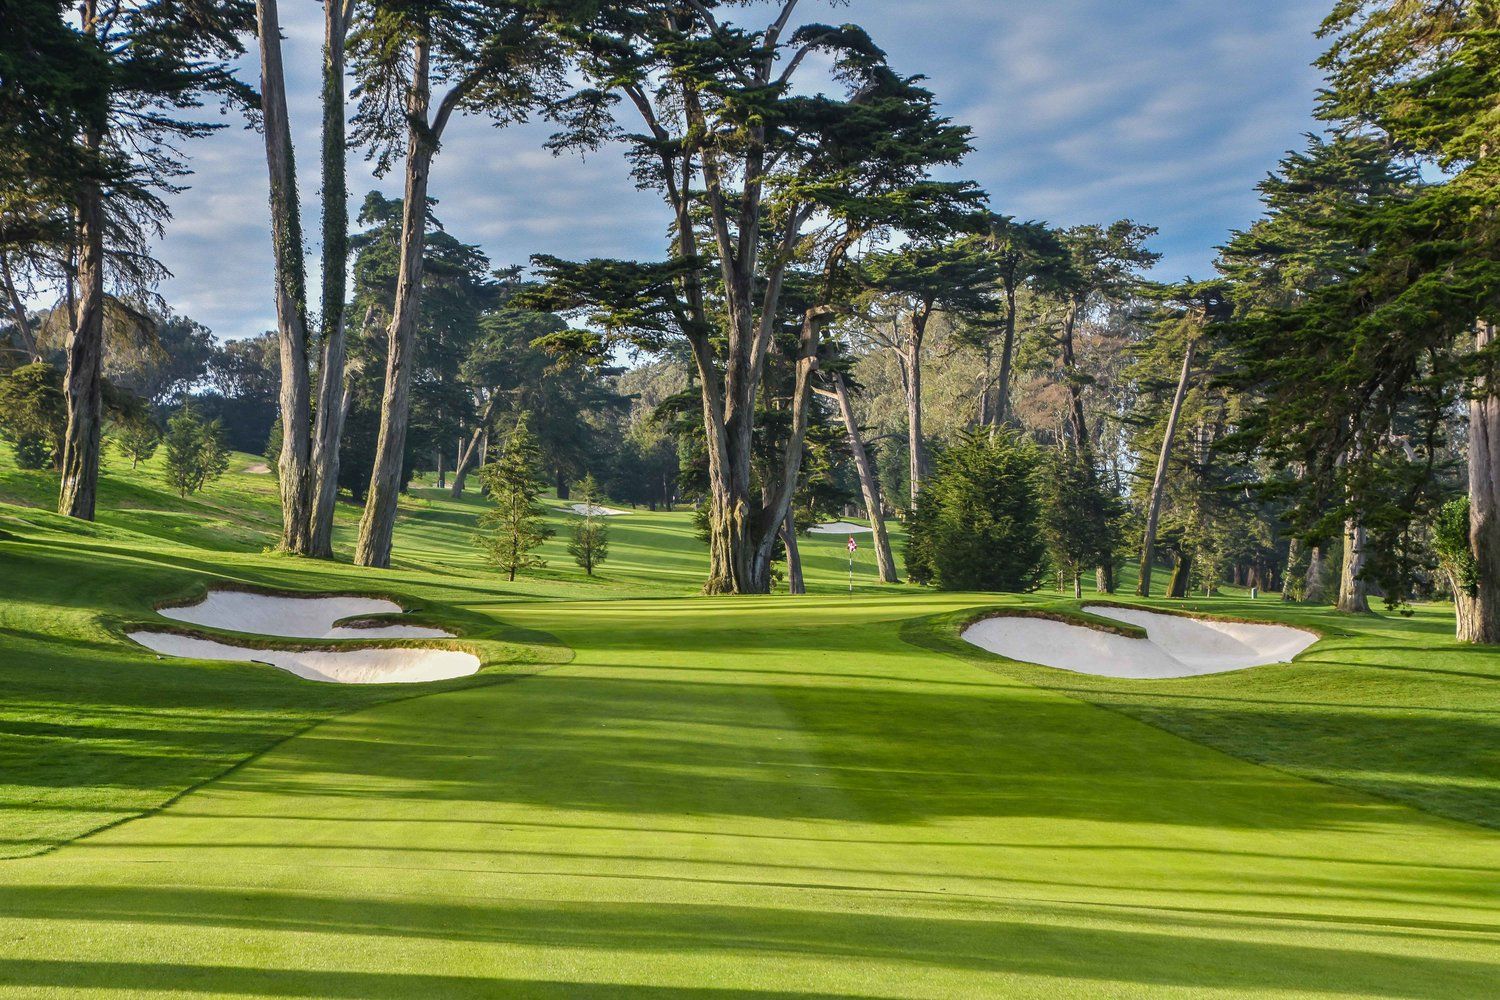 Olympic Club (Lake) - California | Top 100 Golf Courses | Top 100 Golf Courses